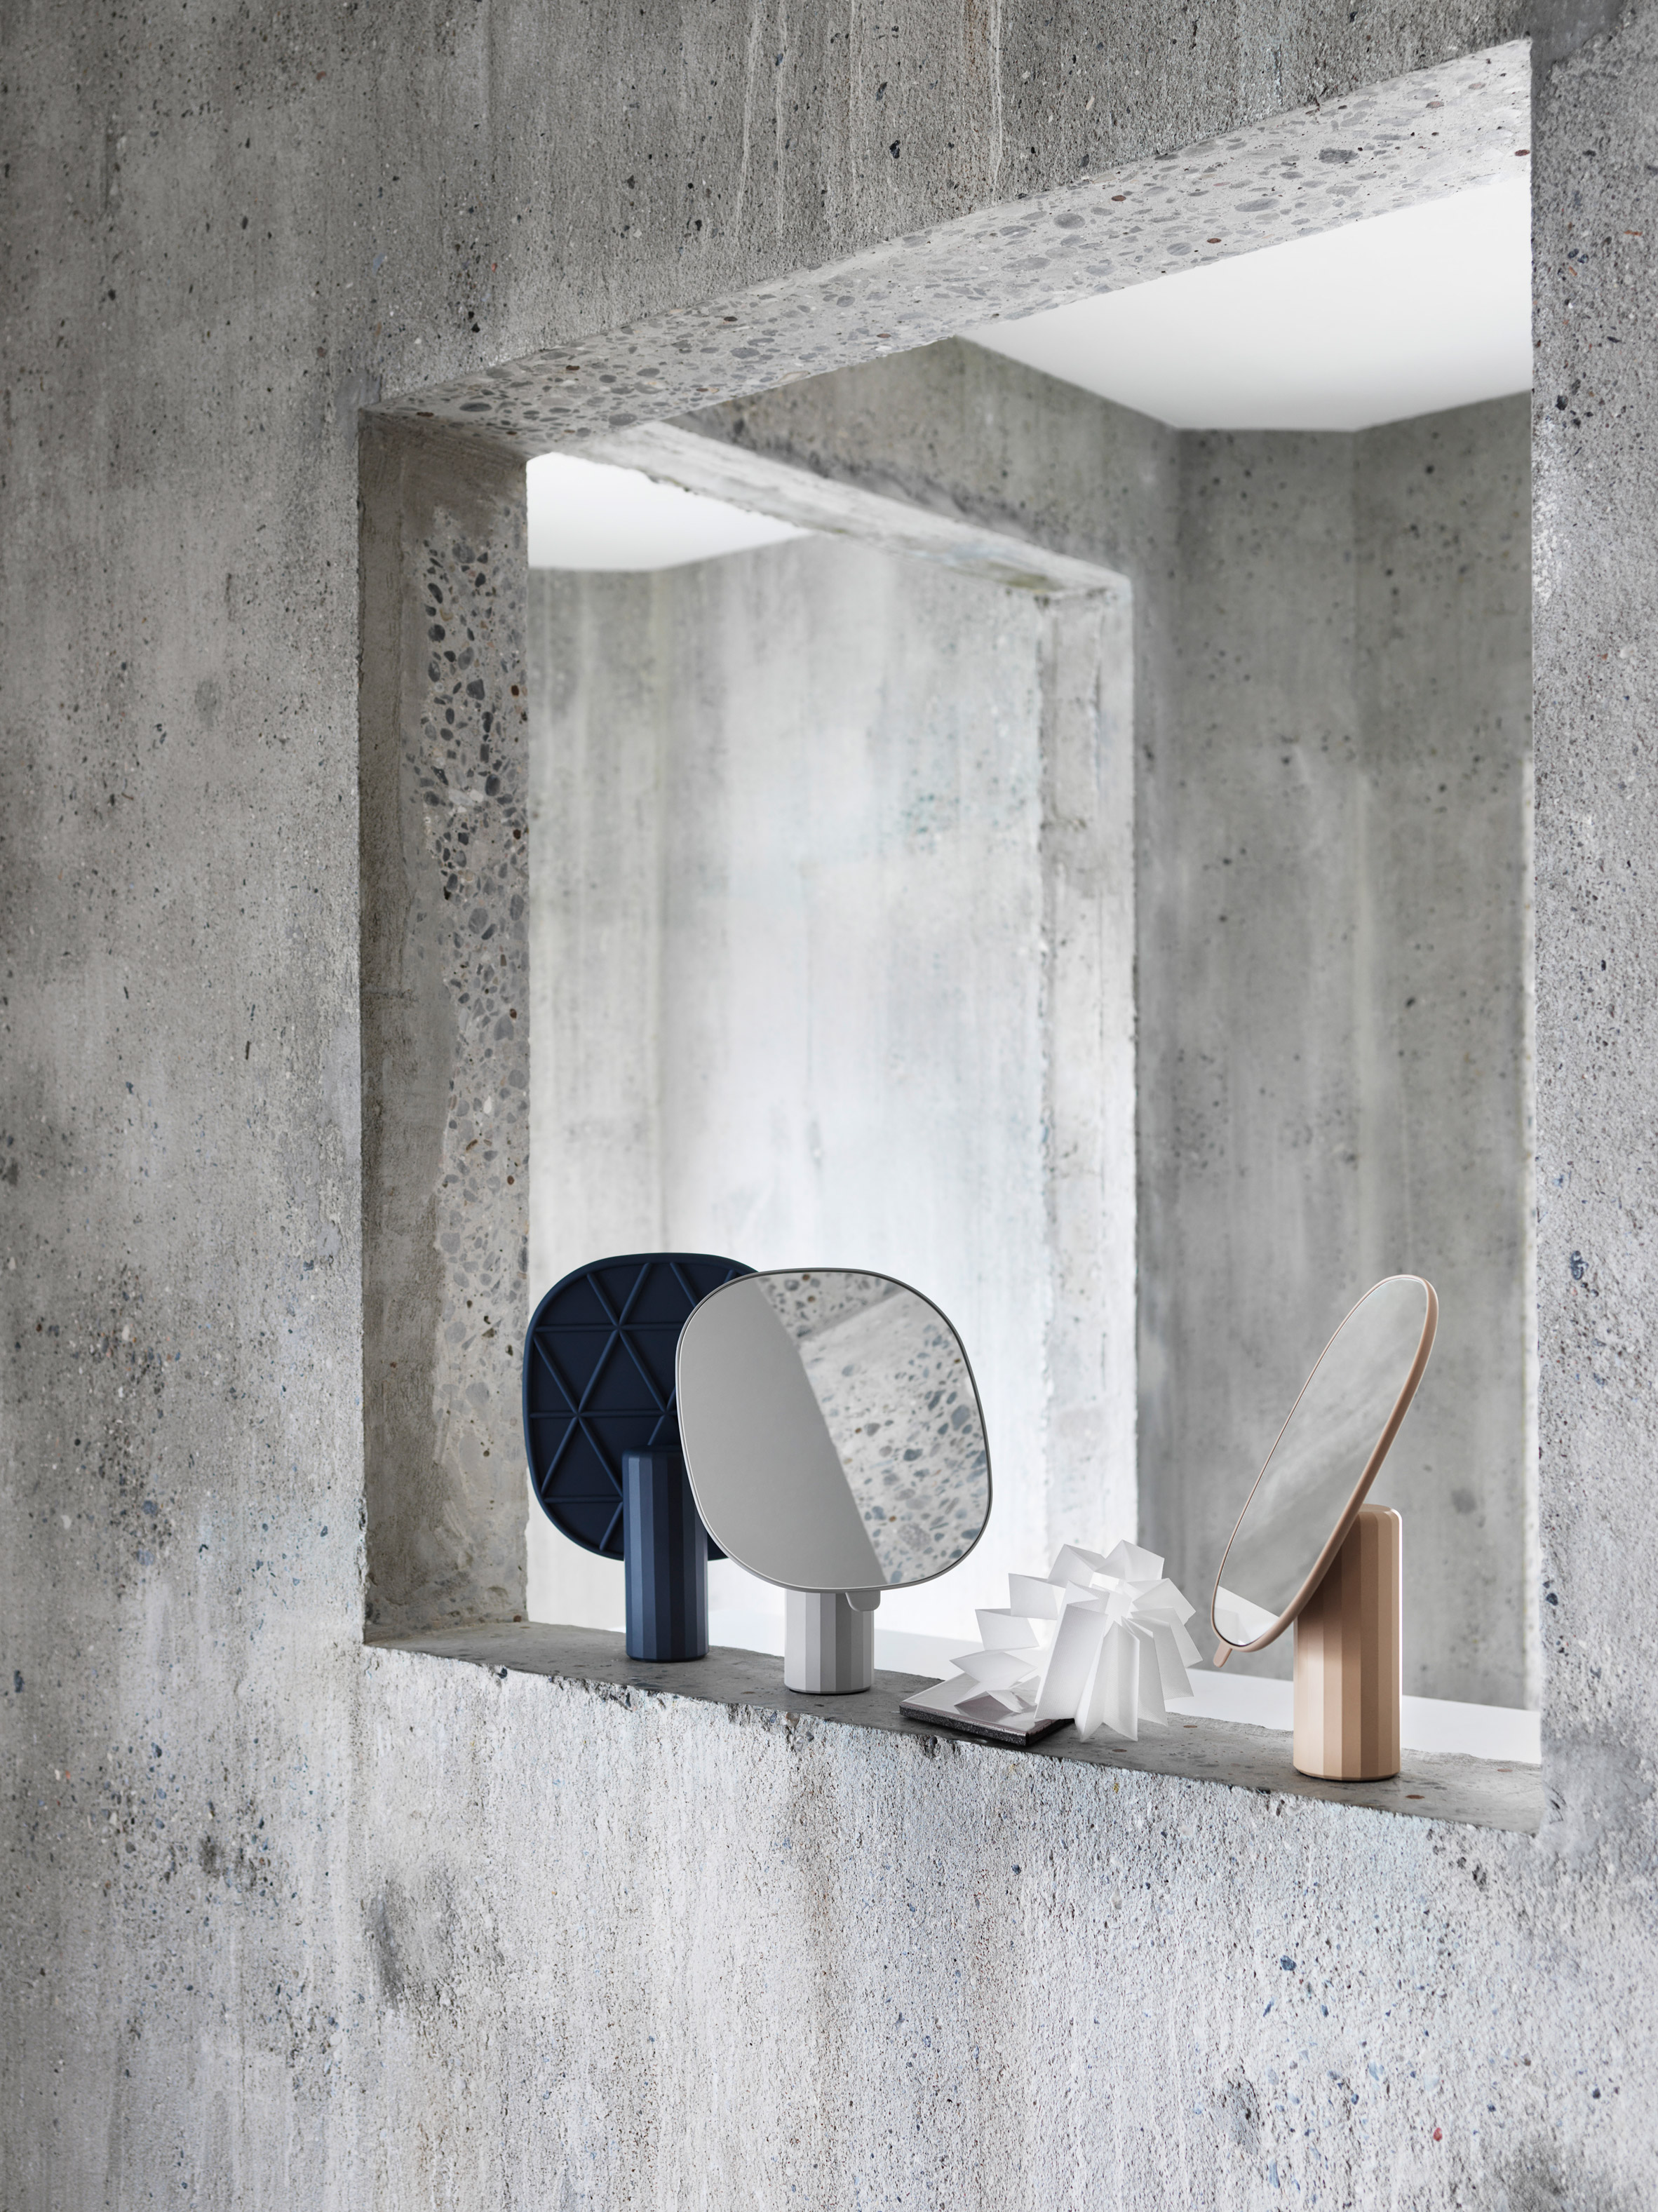 Muuto launches mirror to match those used by Parisian barbers